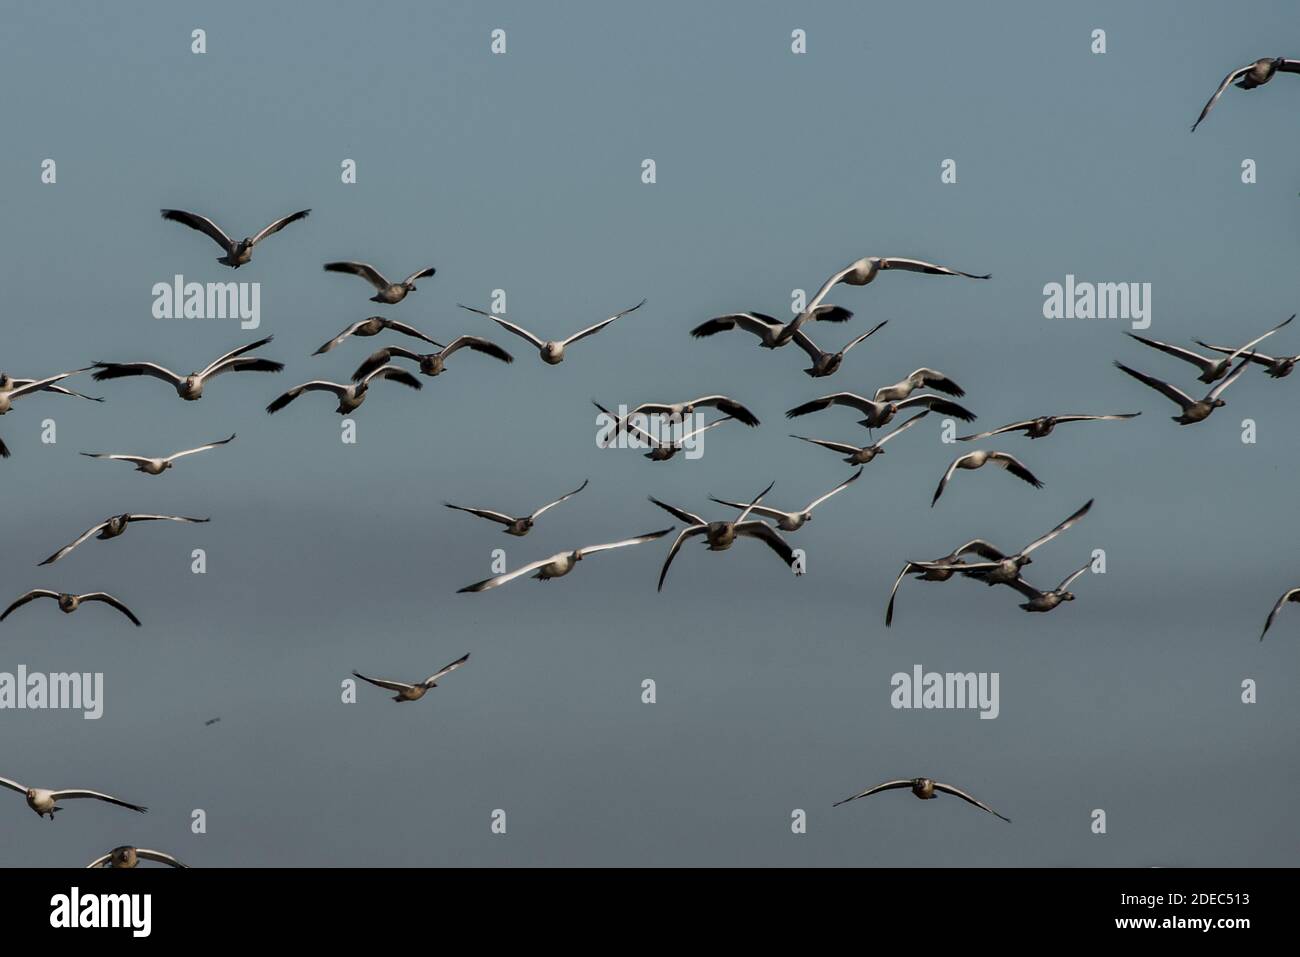 Huge flocks of snow geese (Anser caerulescens) arrive at Sacramento National wildlife refuge in California in November as they migrate from the North. Stock Photo